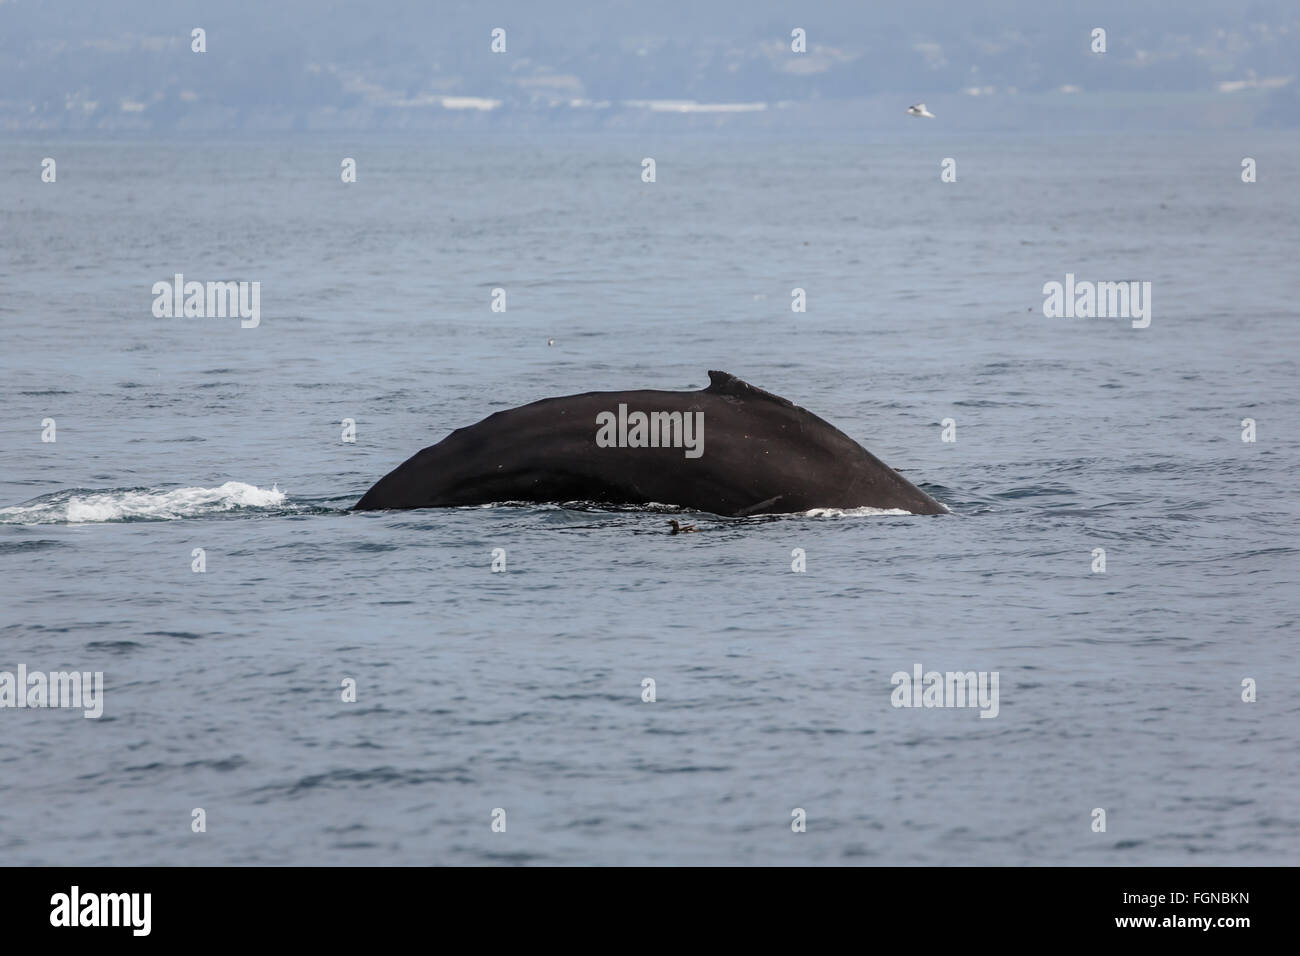 curved back of humpback whale, Megaptera novaeangliae, surfacing in the ocean Stock Photo